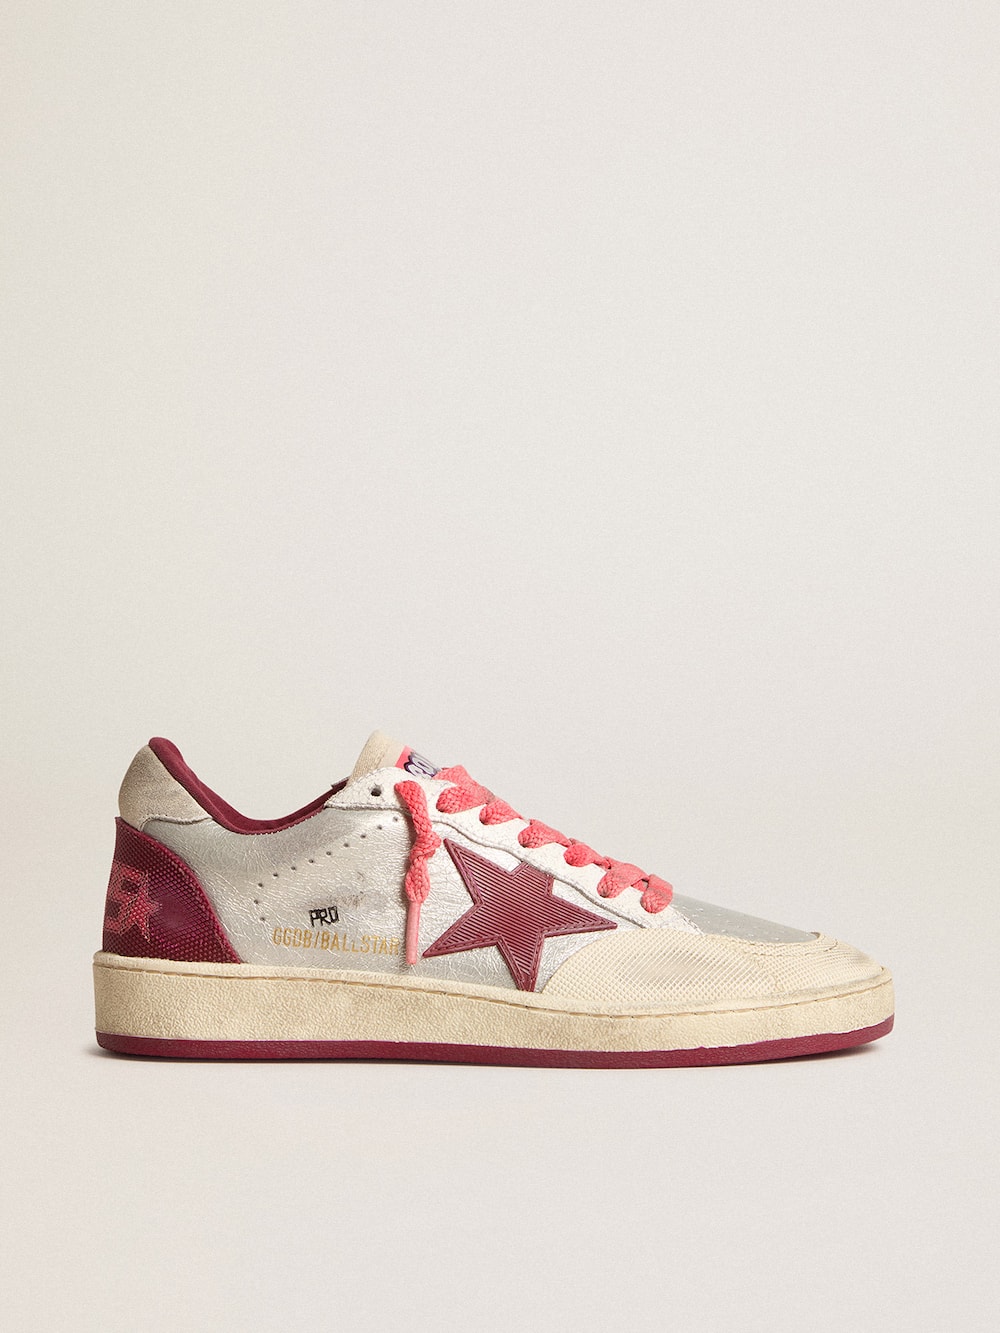 Golden Goose - Ball Star Pro Donna in pelle argento crackle con stella bordeaux in 